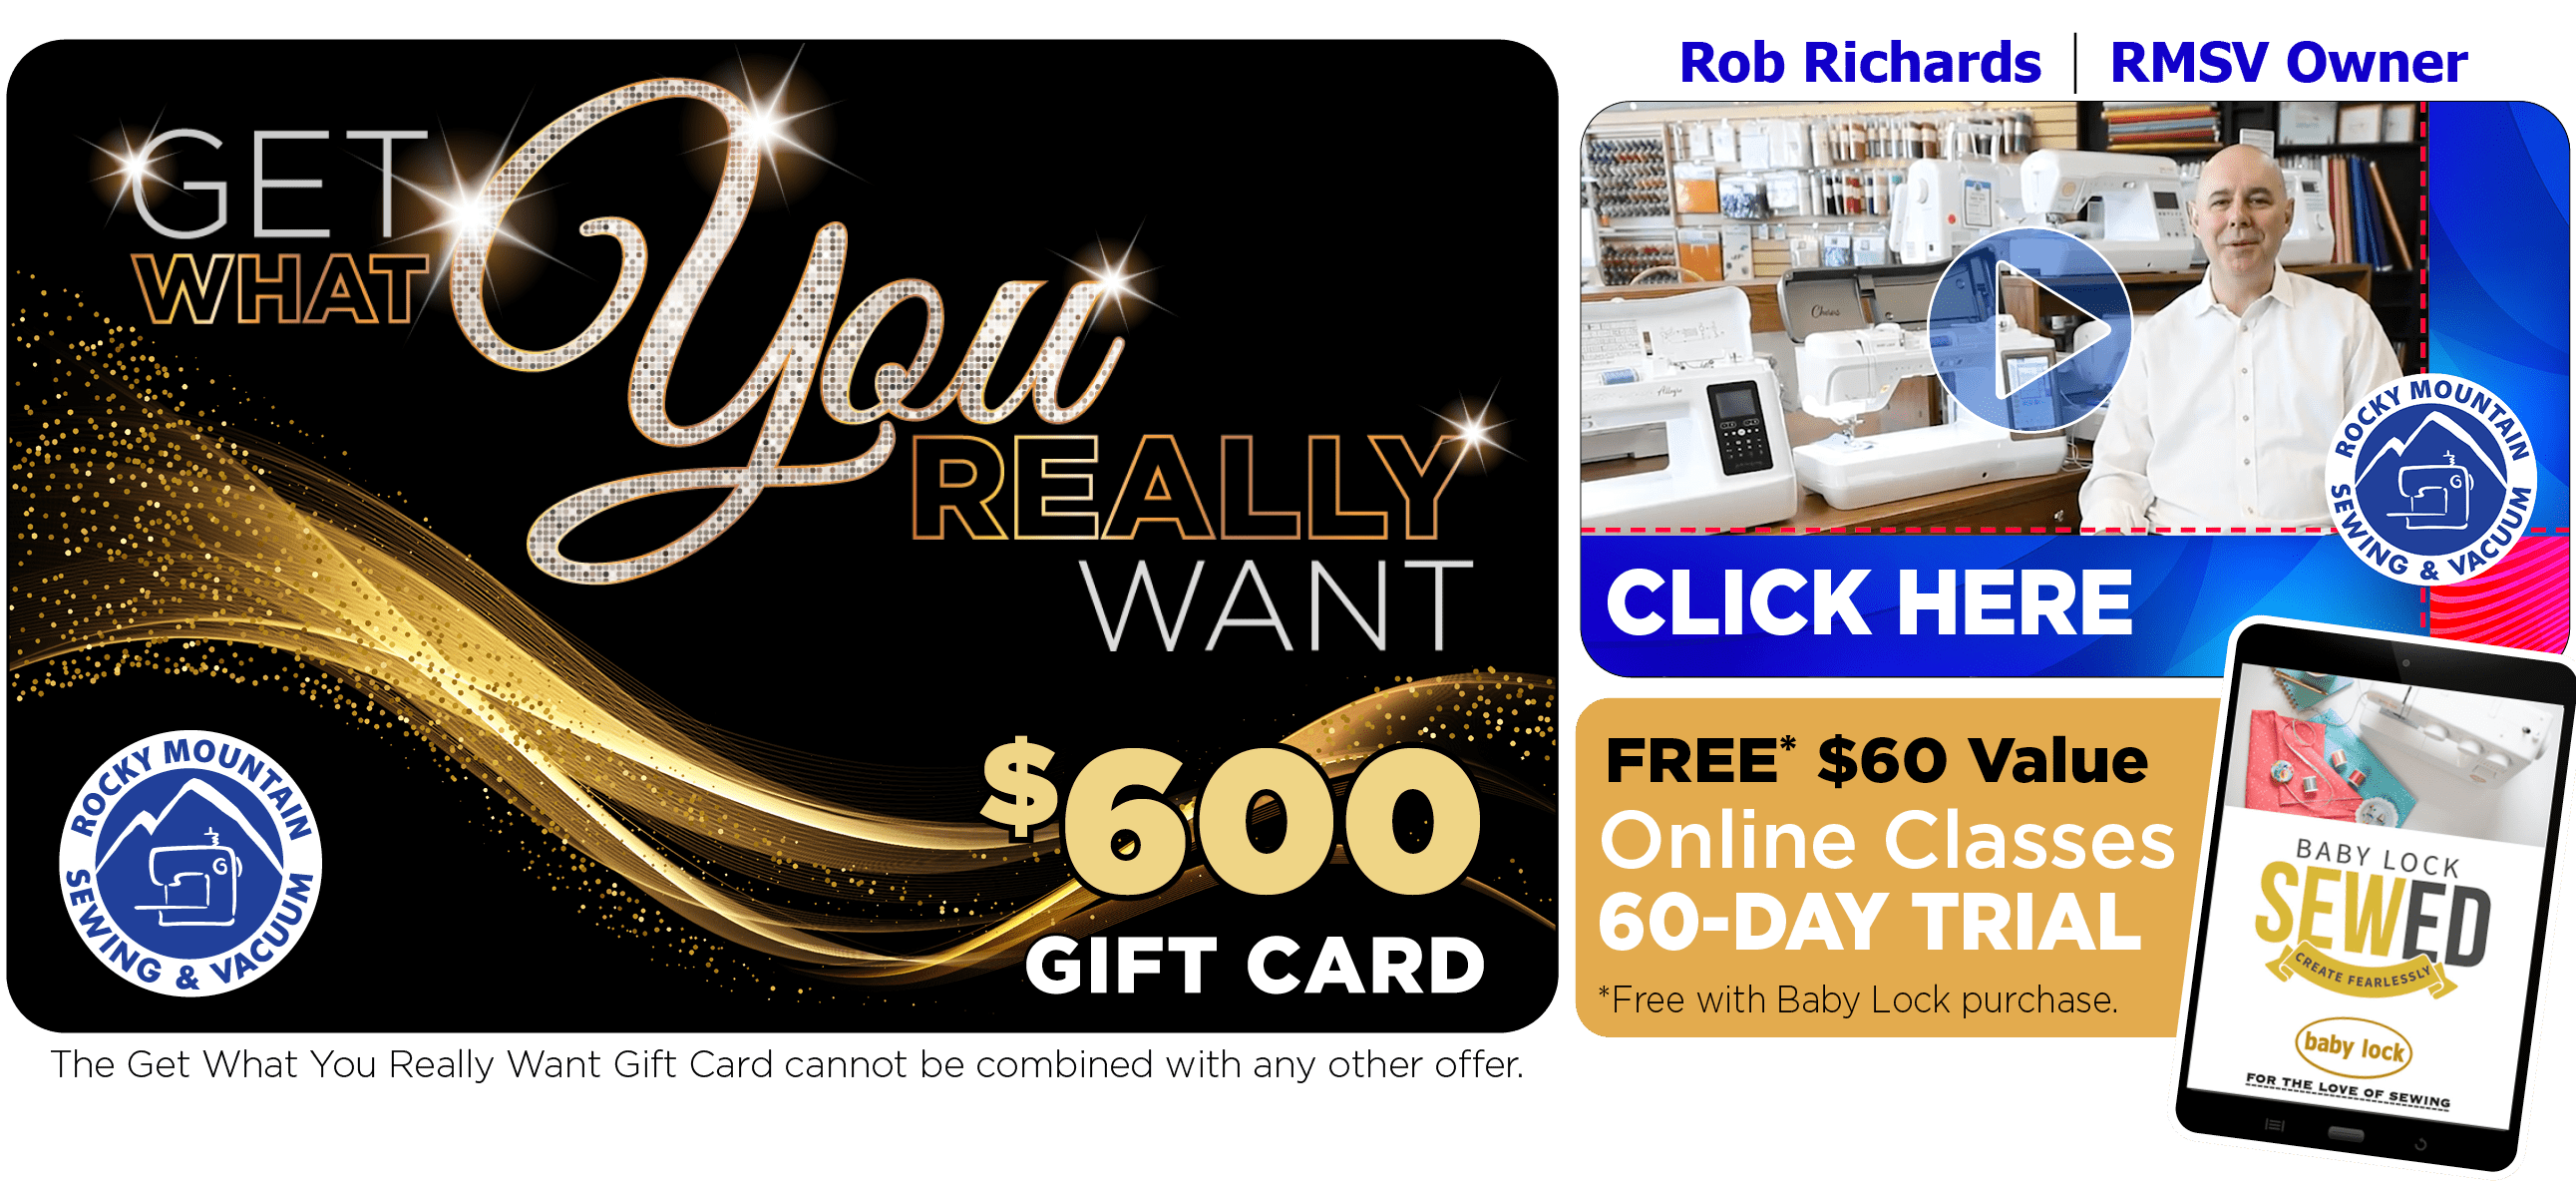 Get What You Really Want $600 Gift Card with Purchase